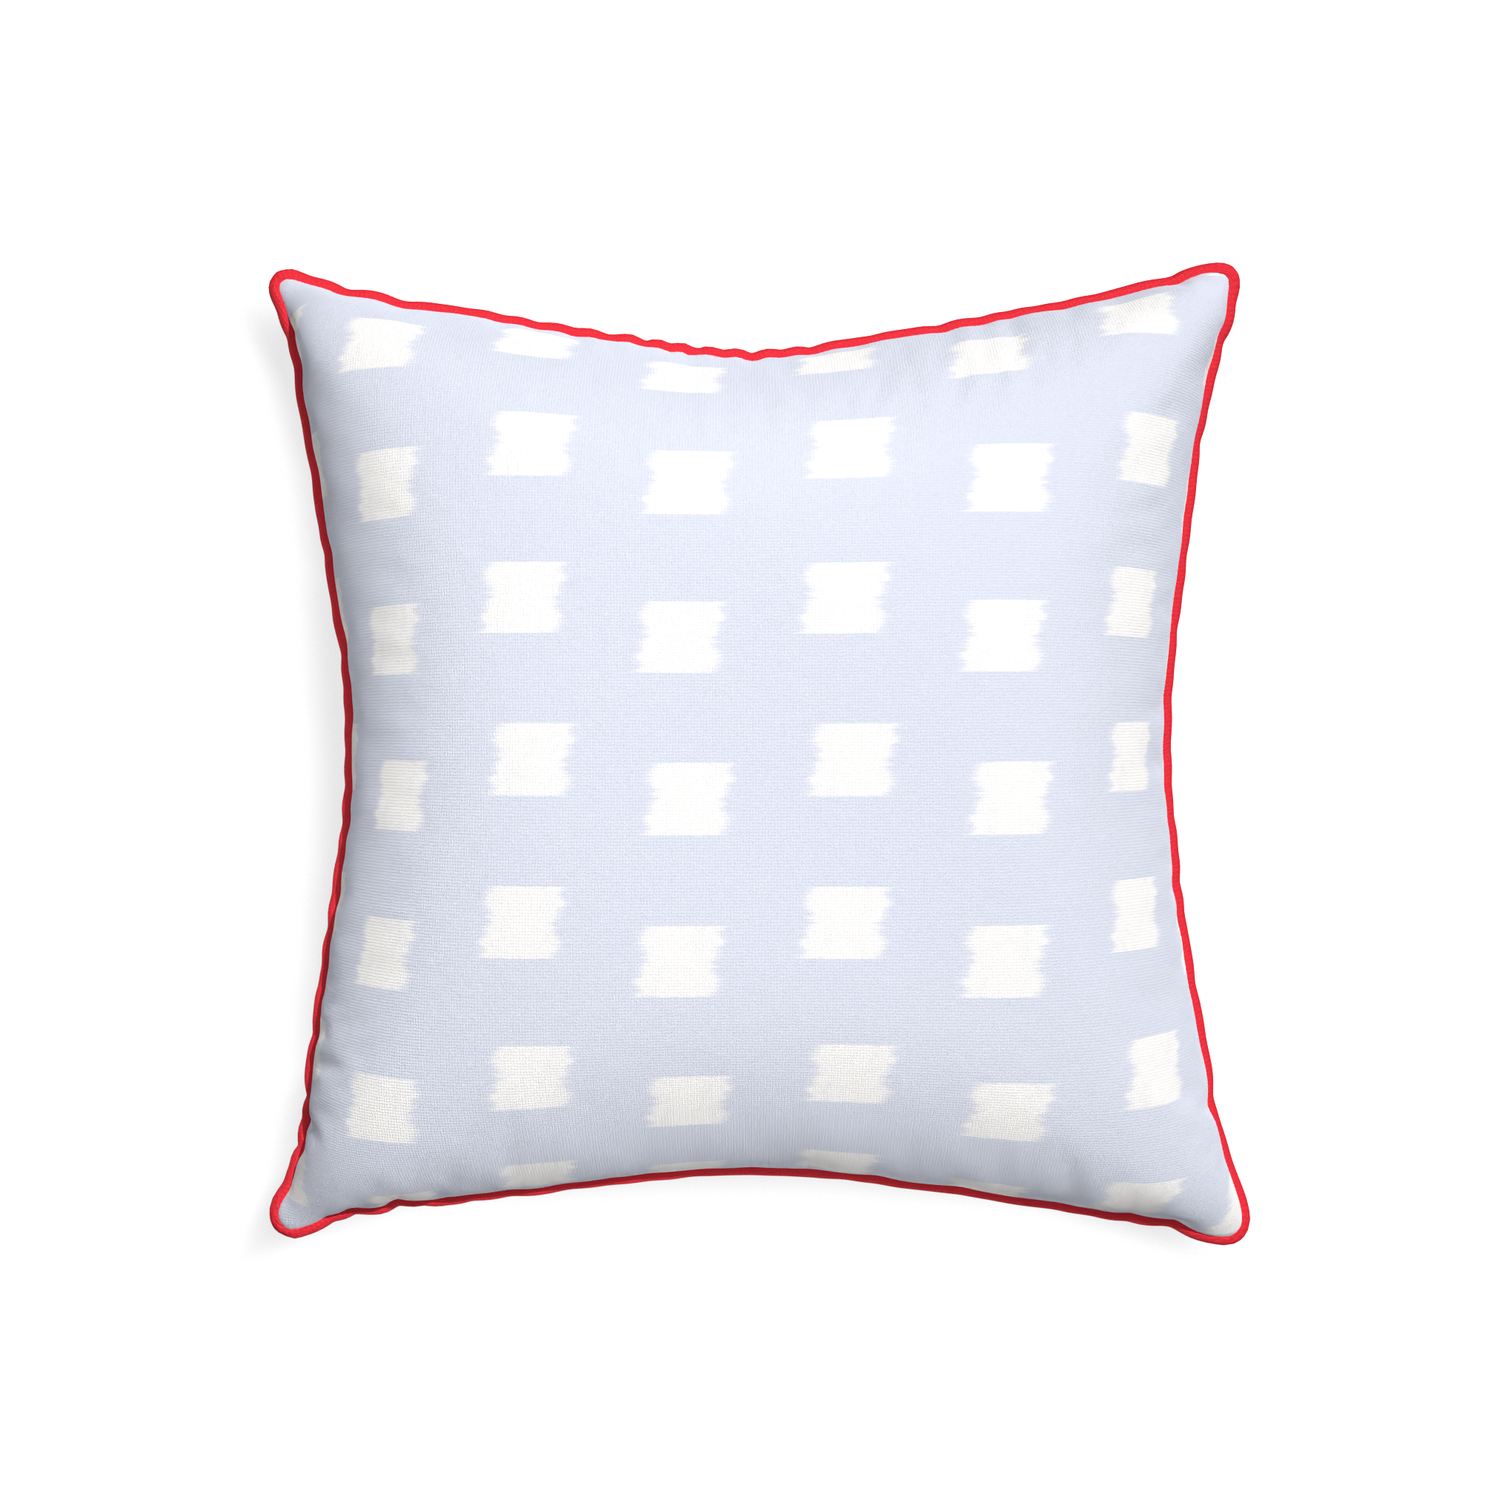 22-square denton custom sky blue patternpillow with cherry piping on white background